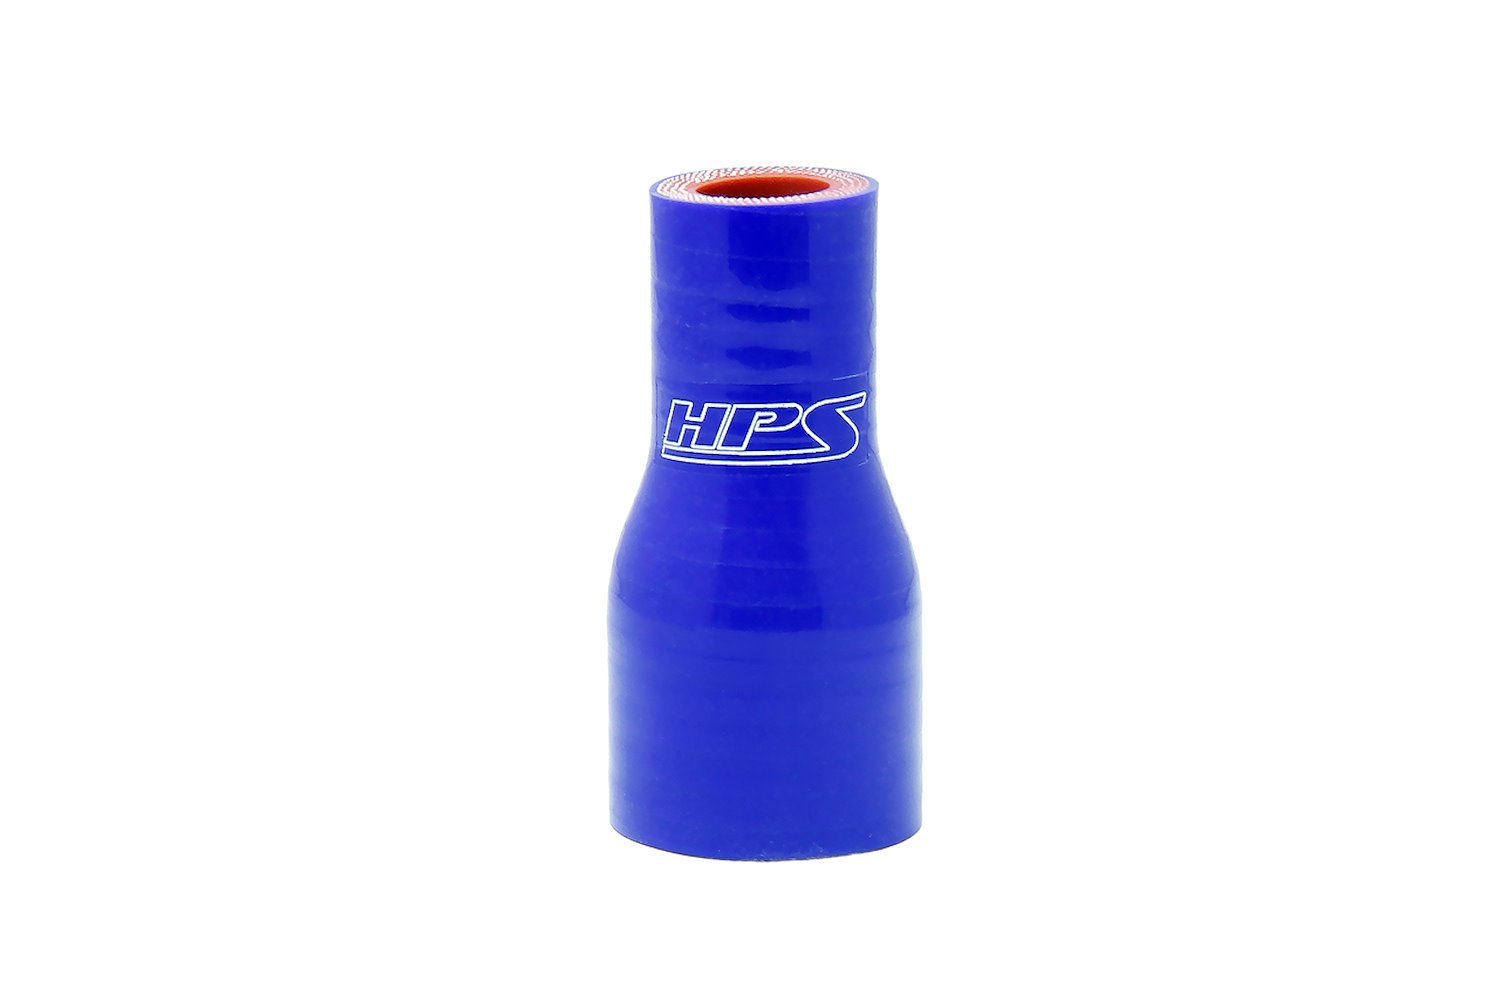 HTSR-125-138-BLUE Silicone Reducer Hose, High-Temp 4-Ply Reinforced, 1-1/4 in. - 1-3/8 in. ID, 3 in. Long, Blue